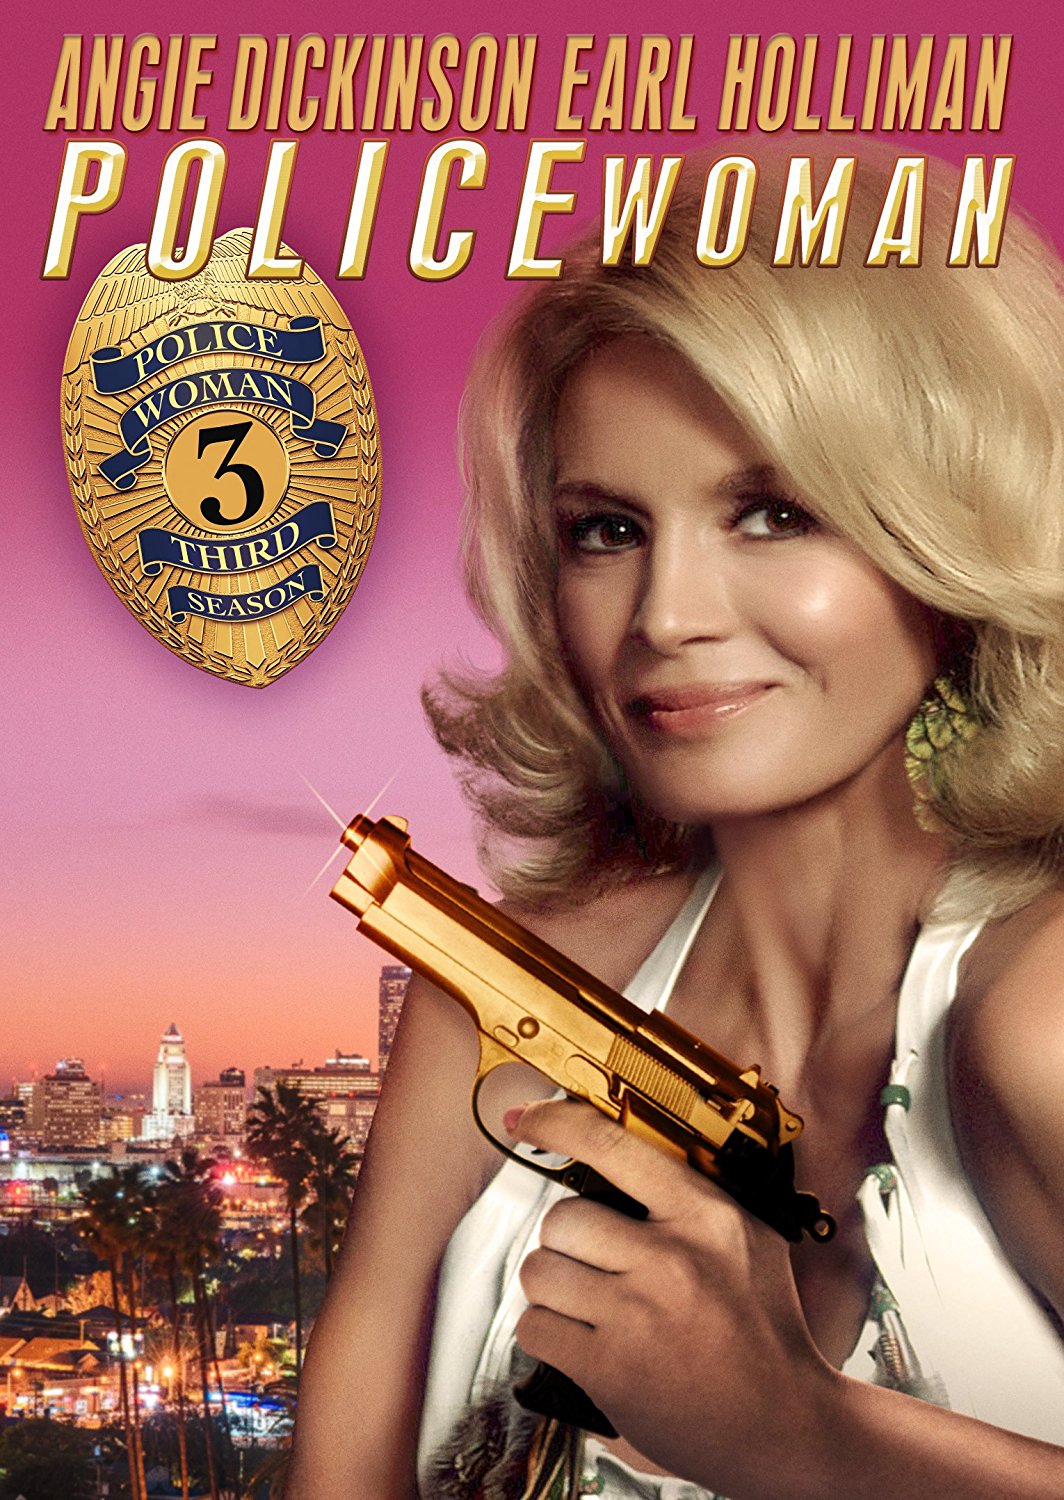 Police Woman Season 3 starring Angie Dickinson featuring The Trick Book guest starring Joan Collins